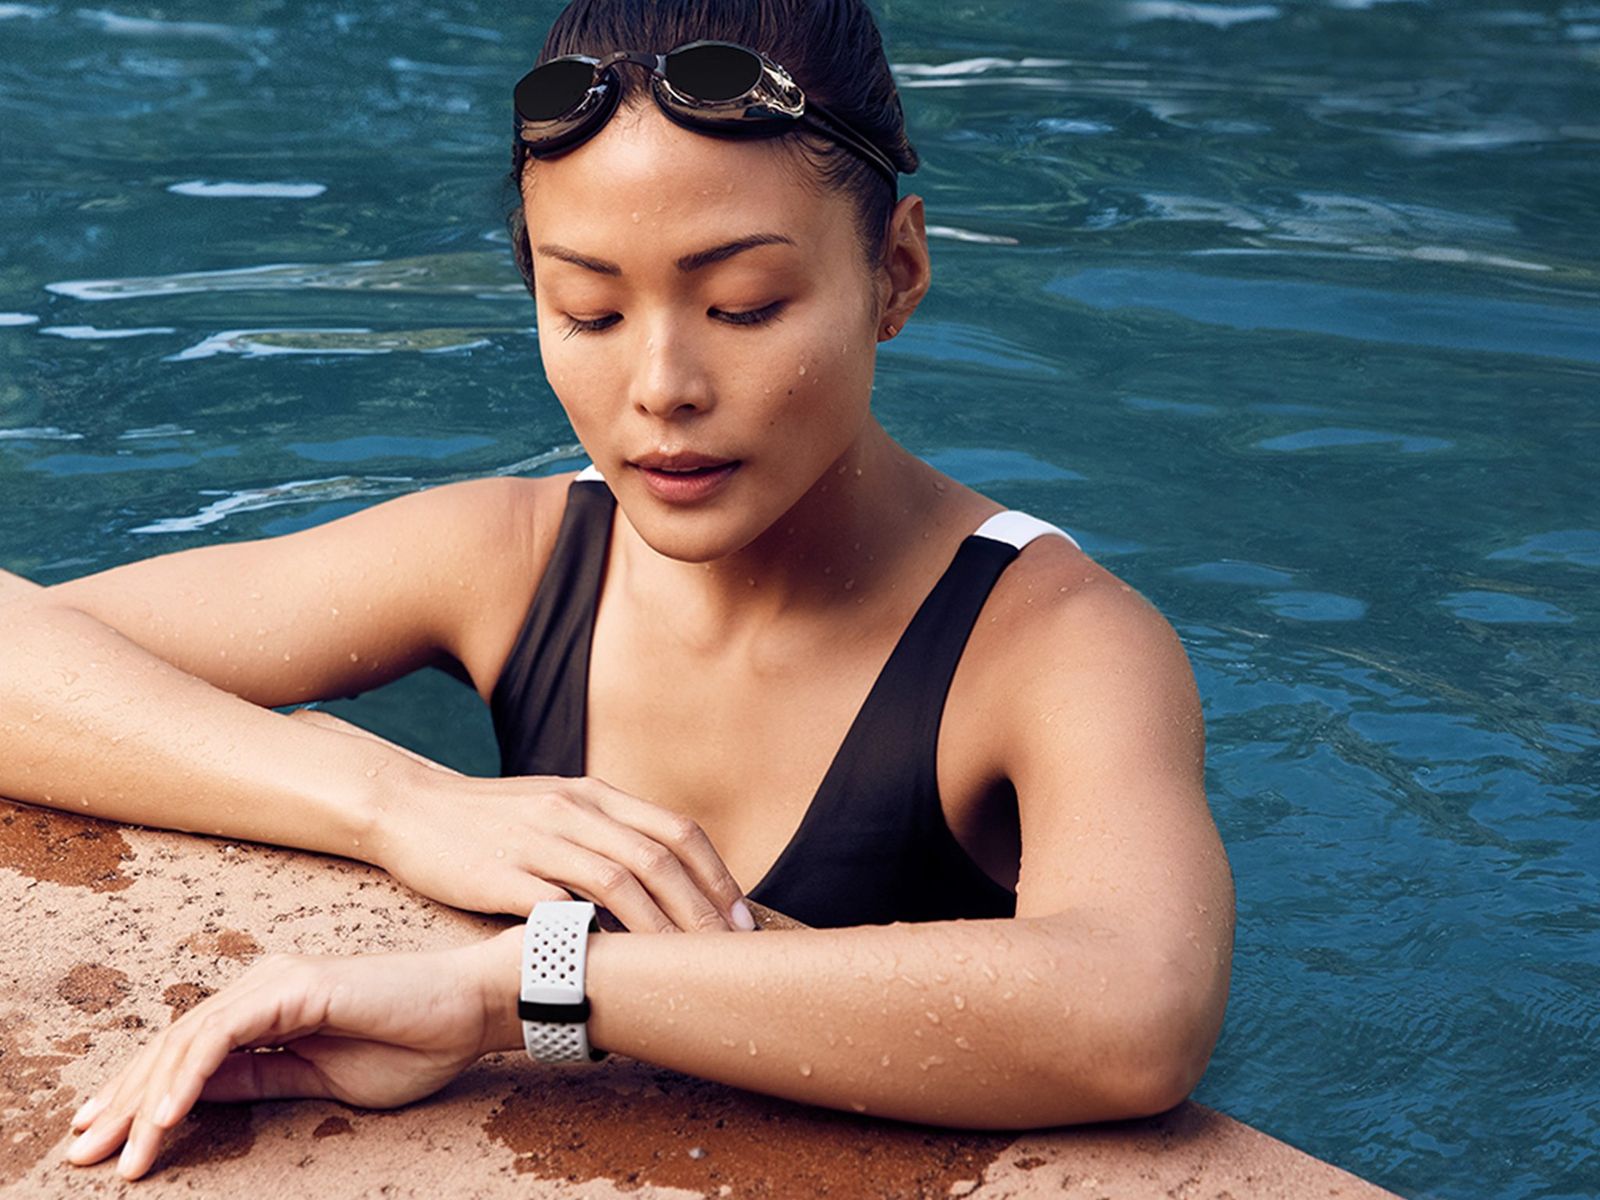 Can you swim with the Fitbit Charge 3 